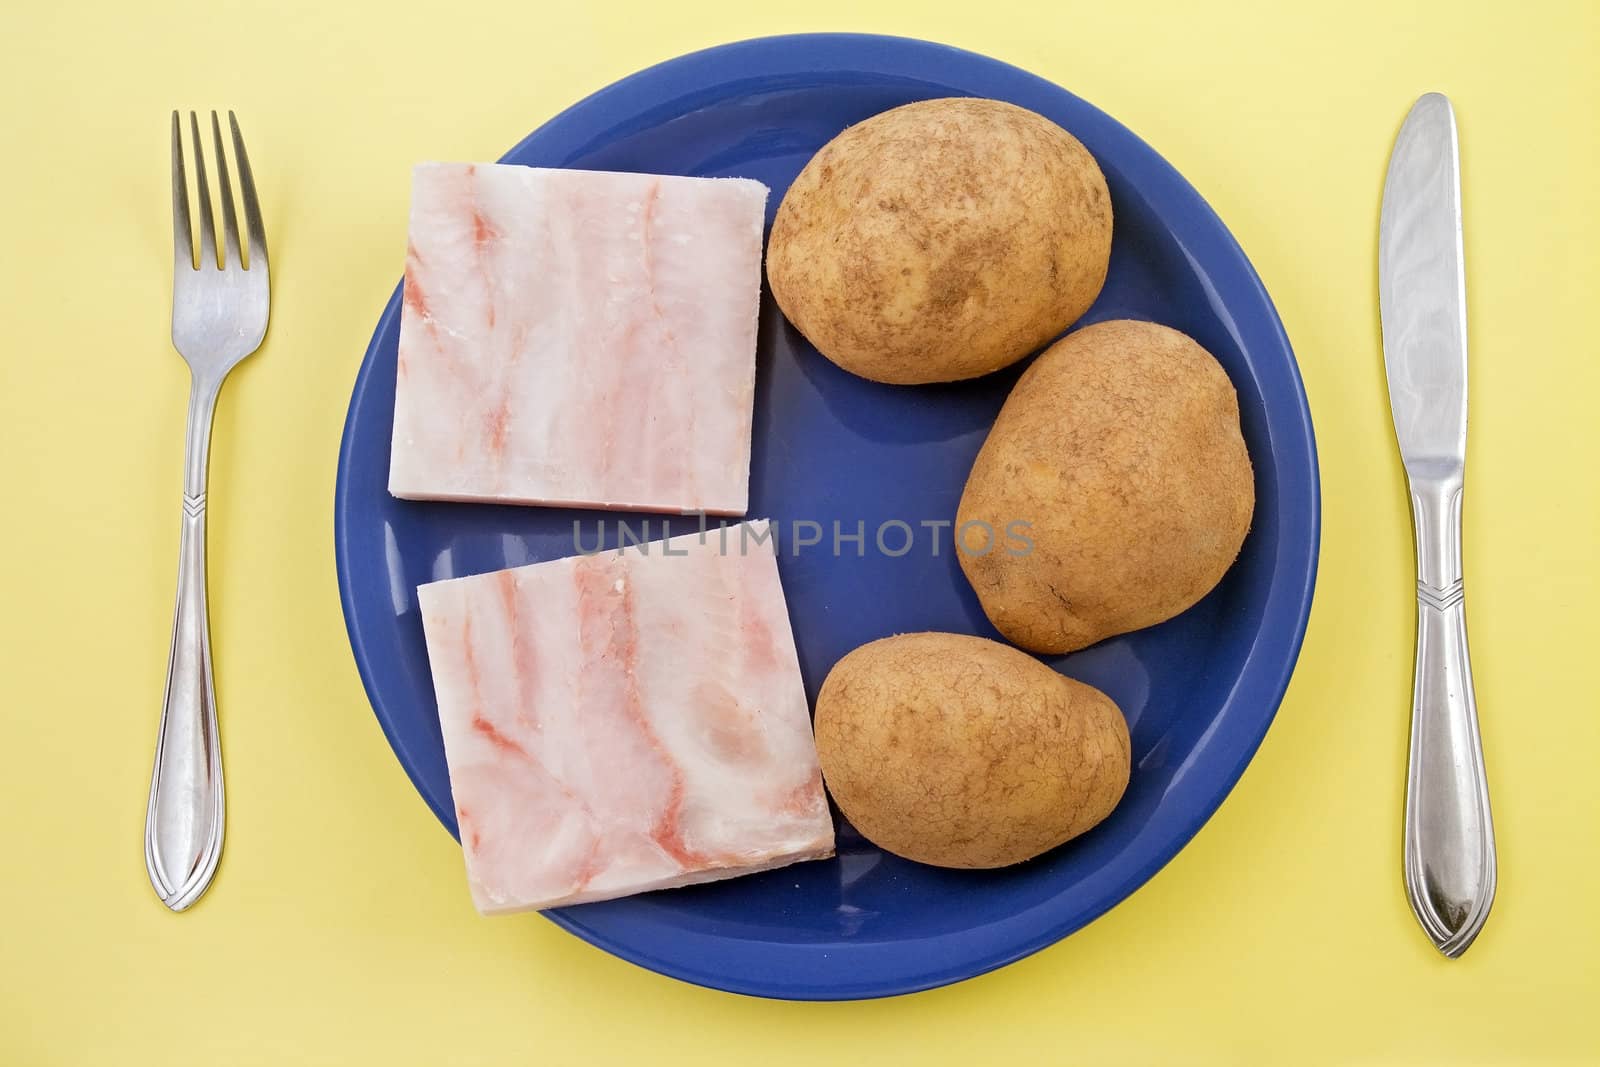 fish fillet and potatoes in jackets 